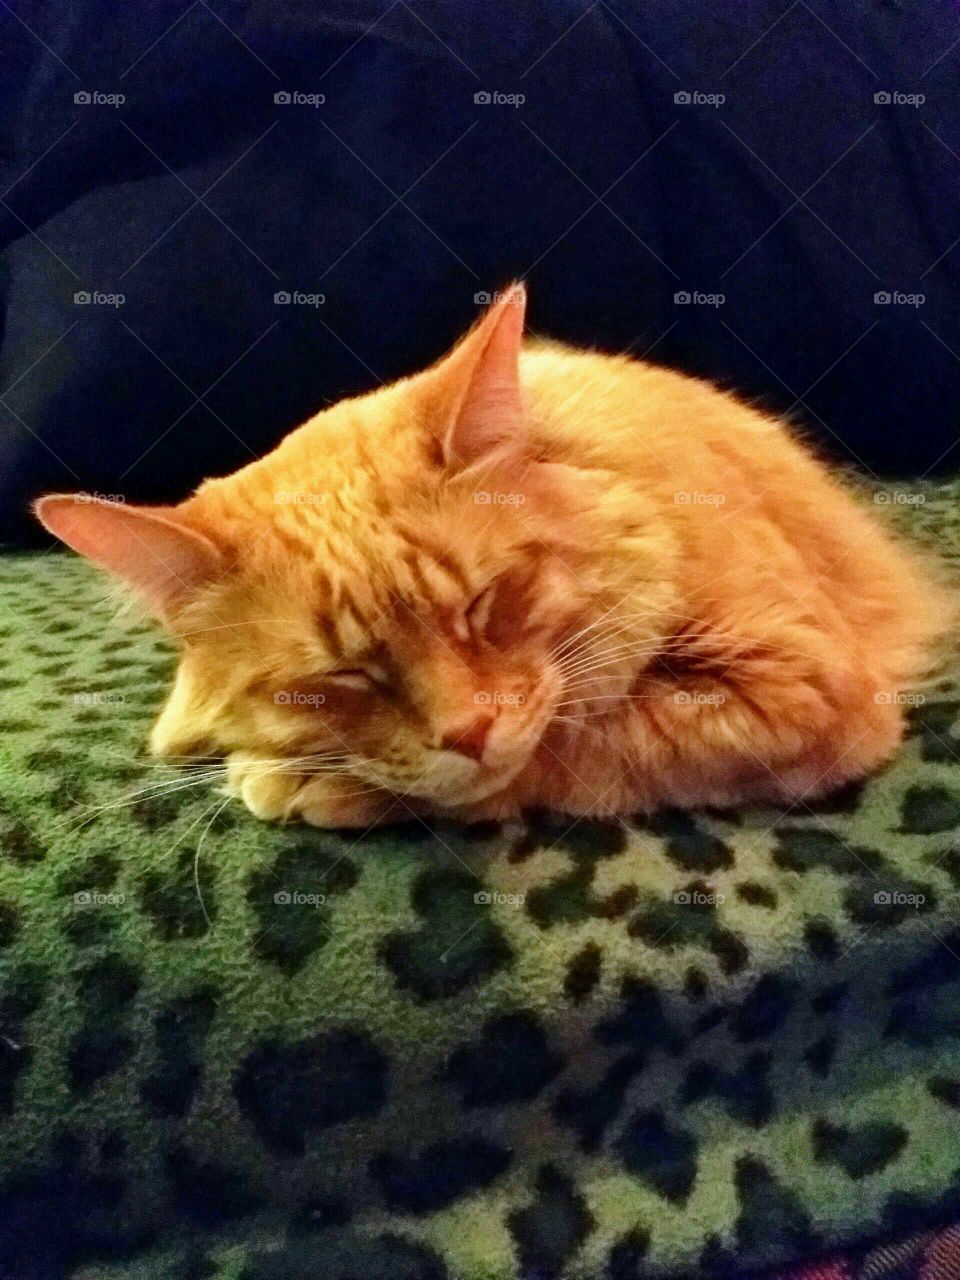 Close-up of a orange long-haired cat sleeping